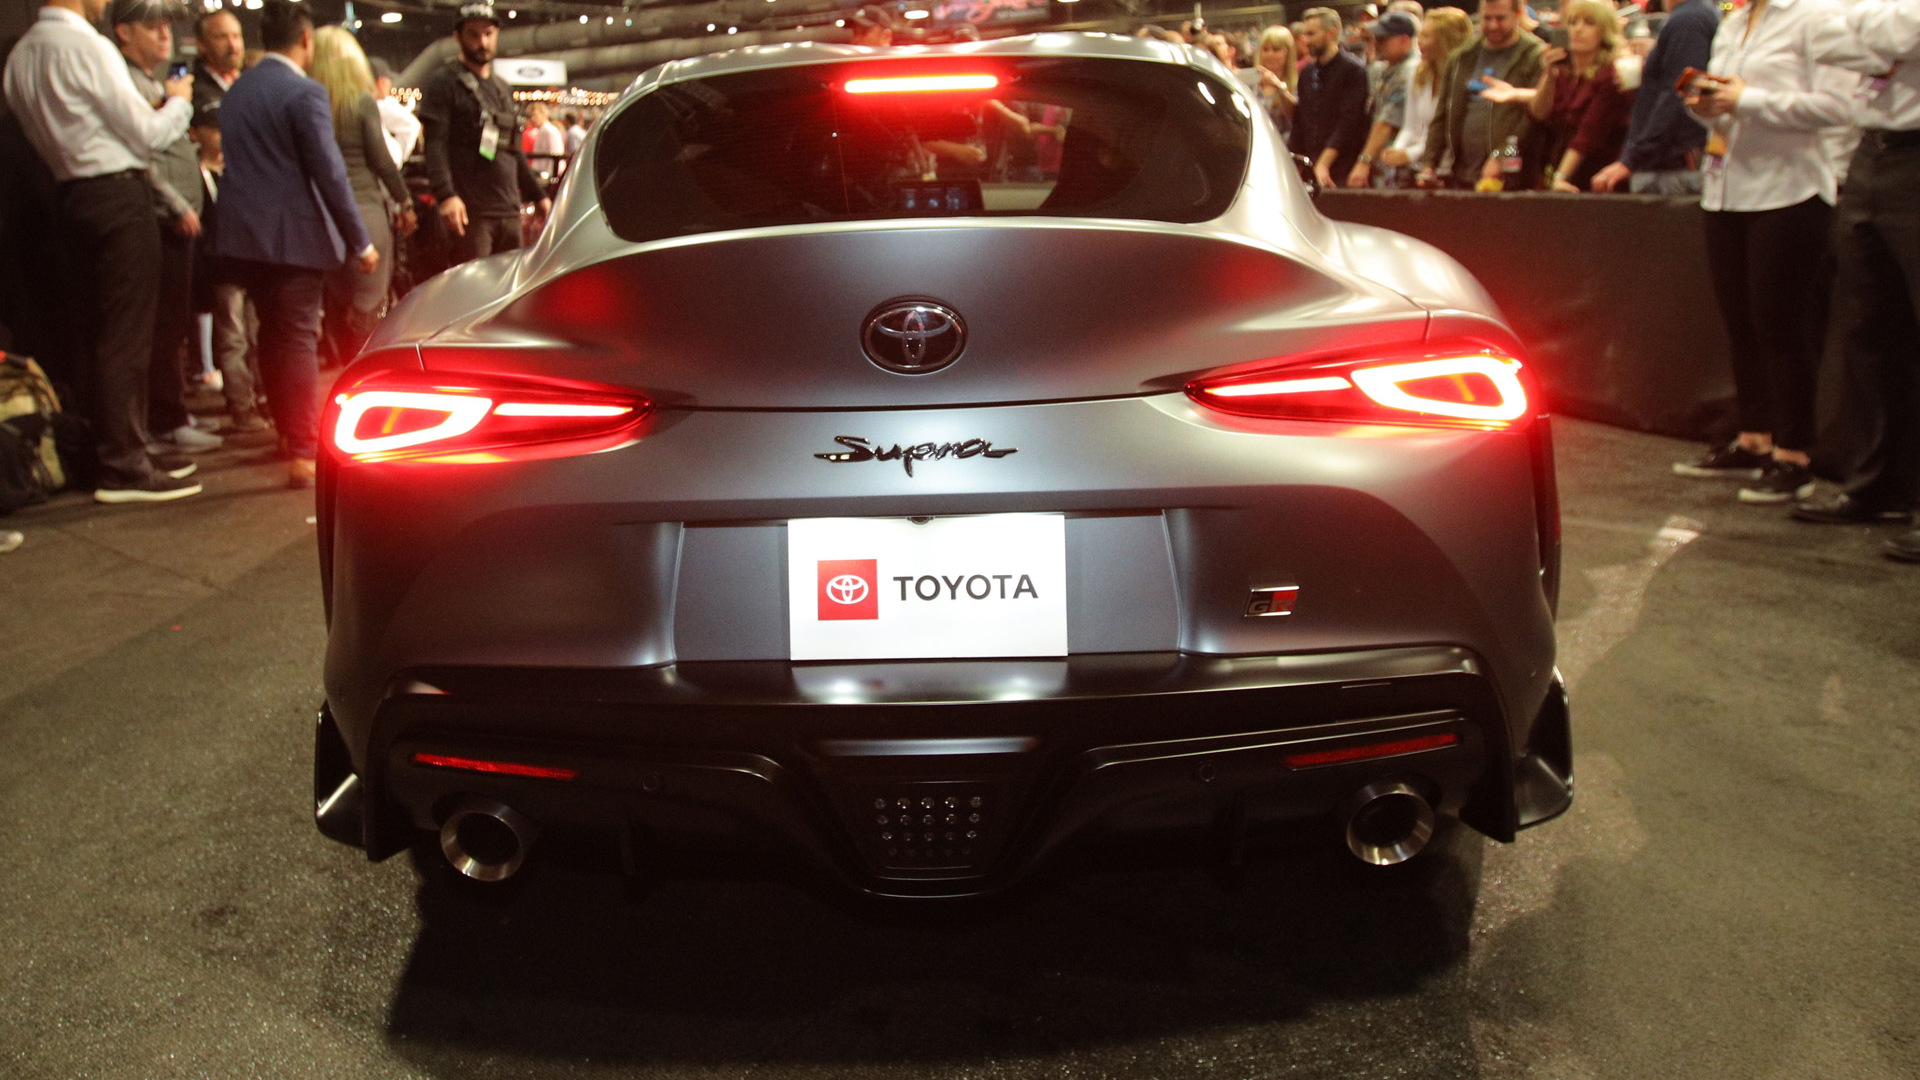 Auction of 2020 Toyota Supra with VIN ending in 01 on January 19, 2019